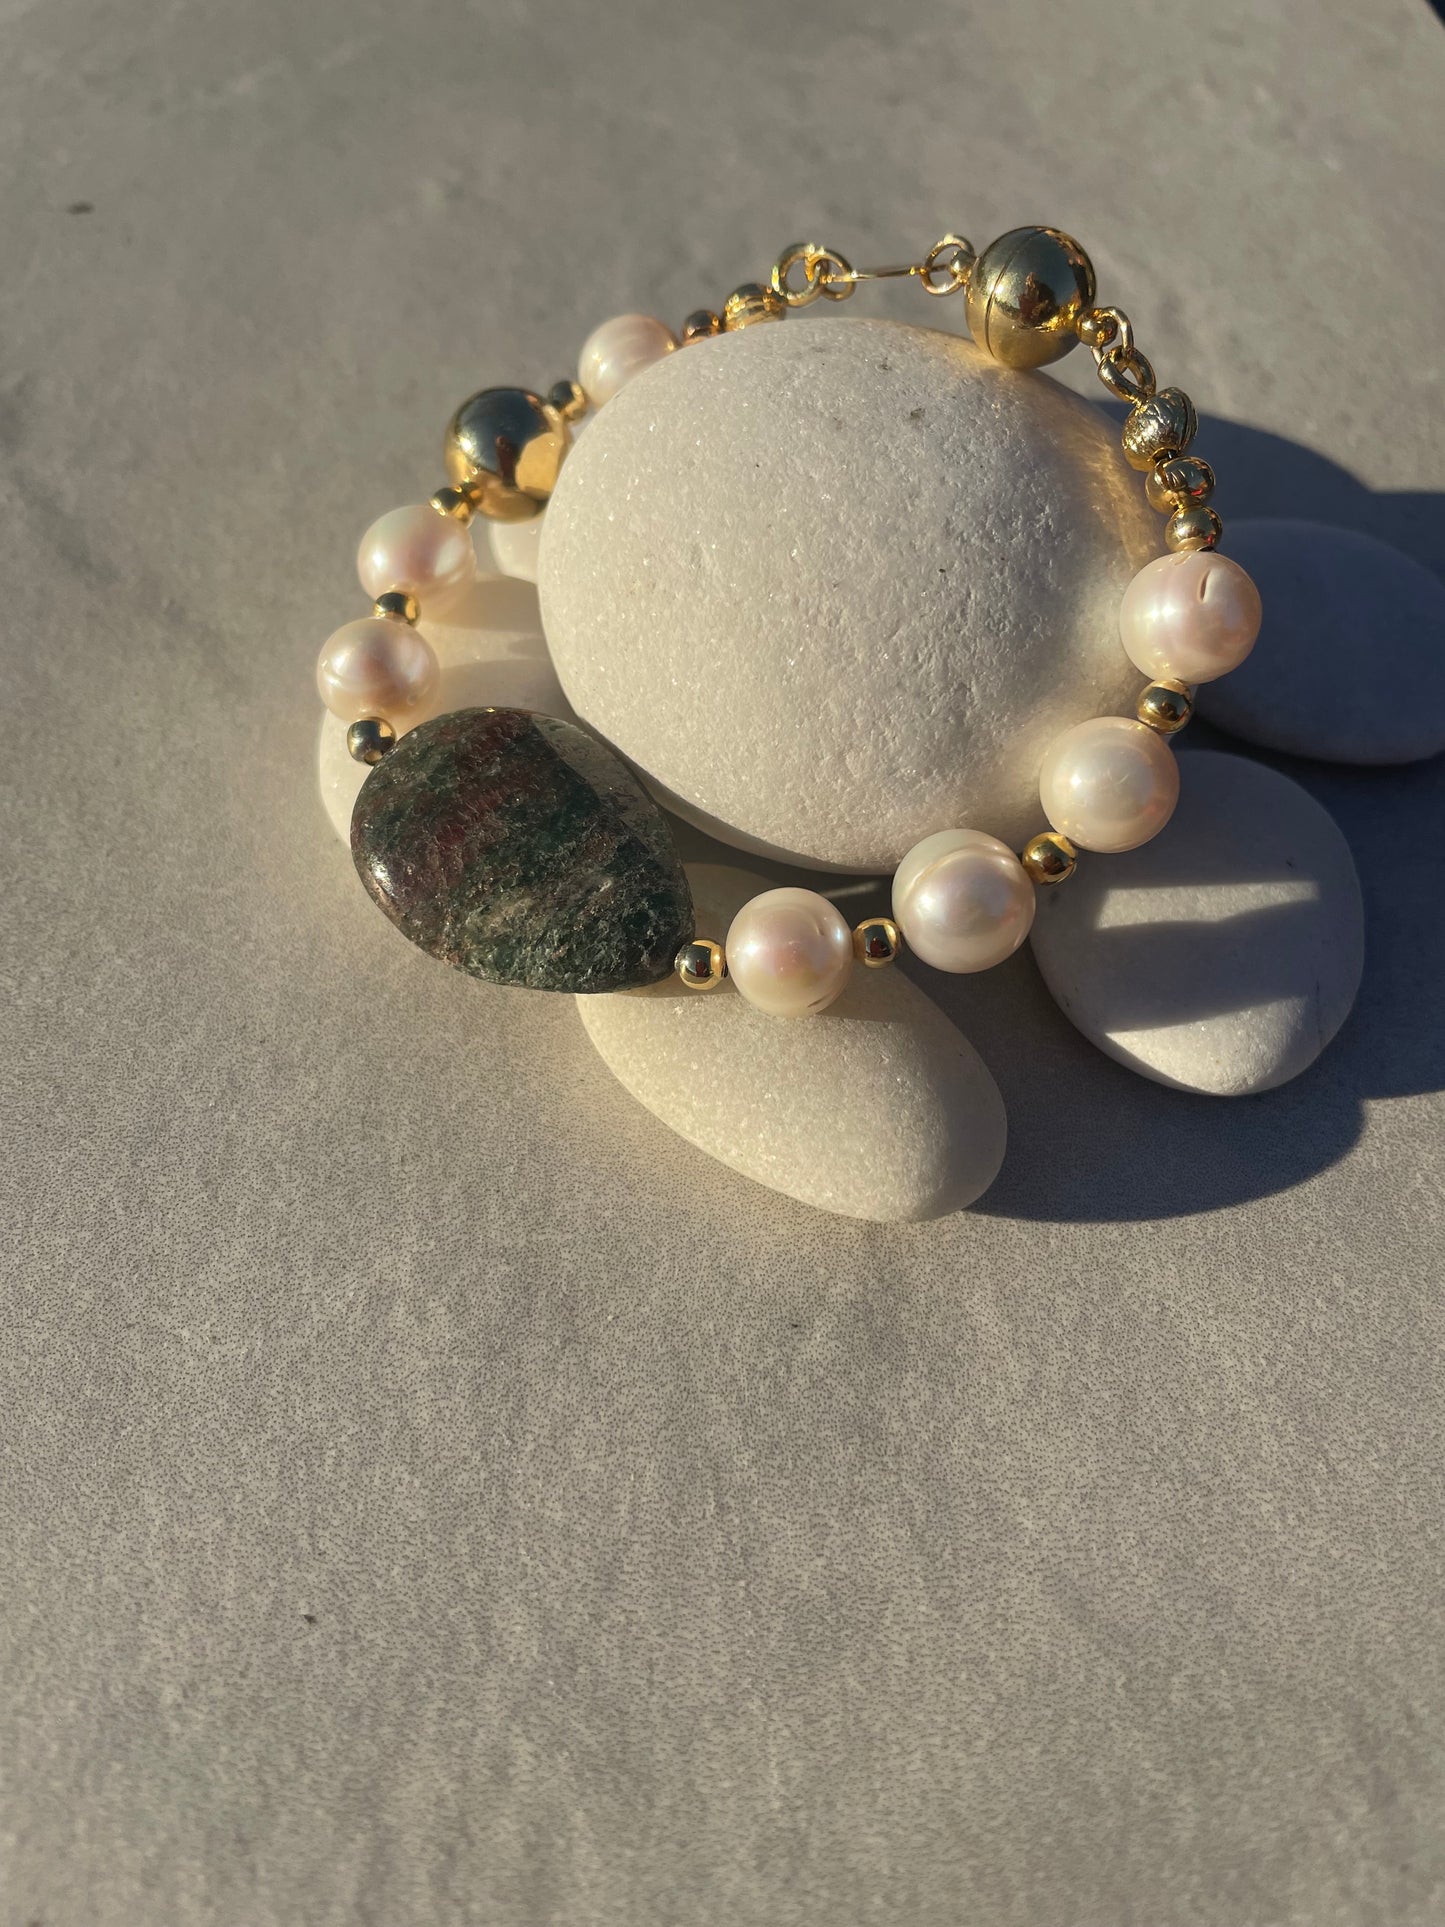 Not your ordinary pearl bracelet